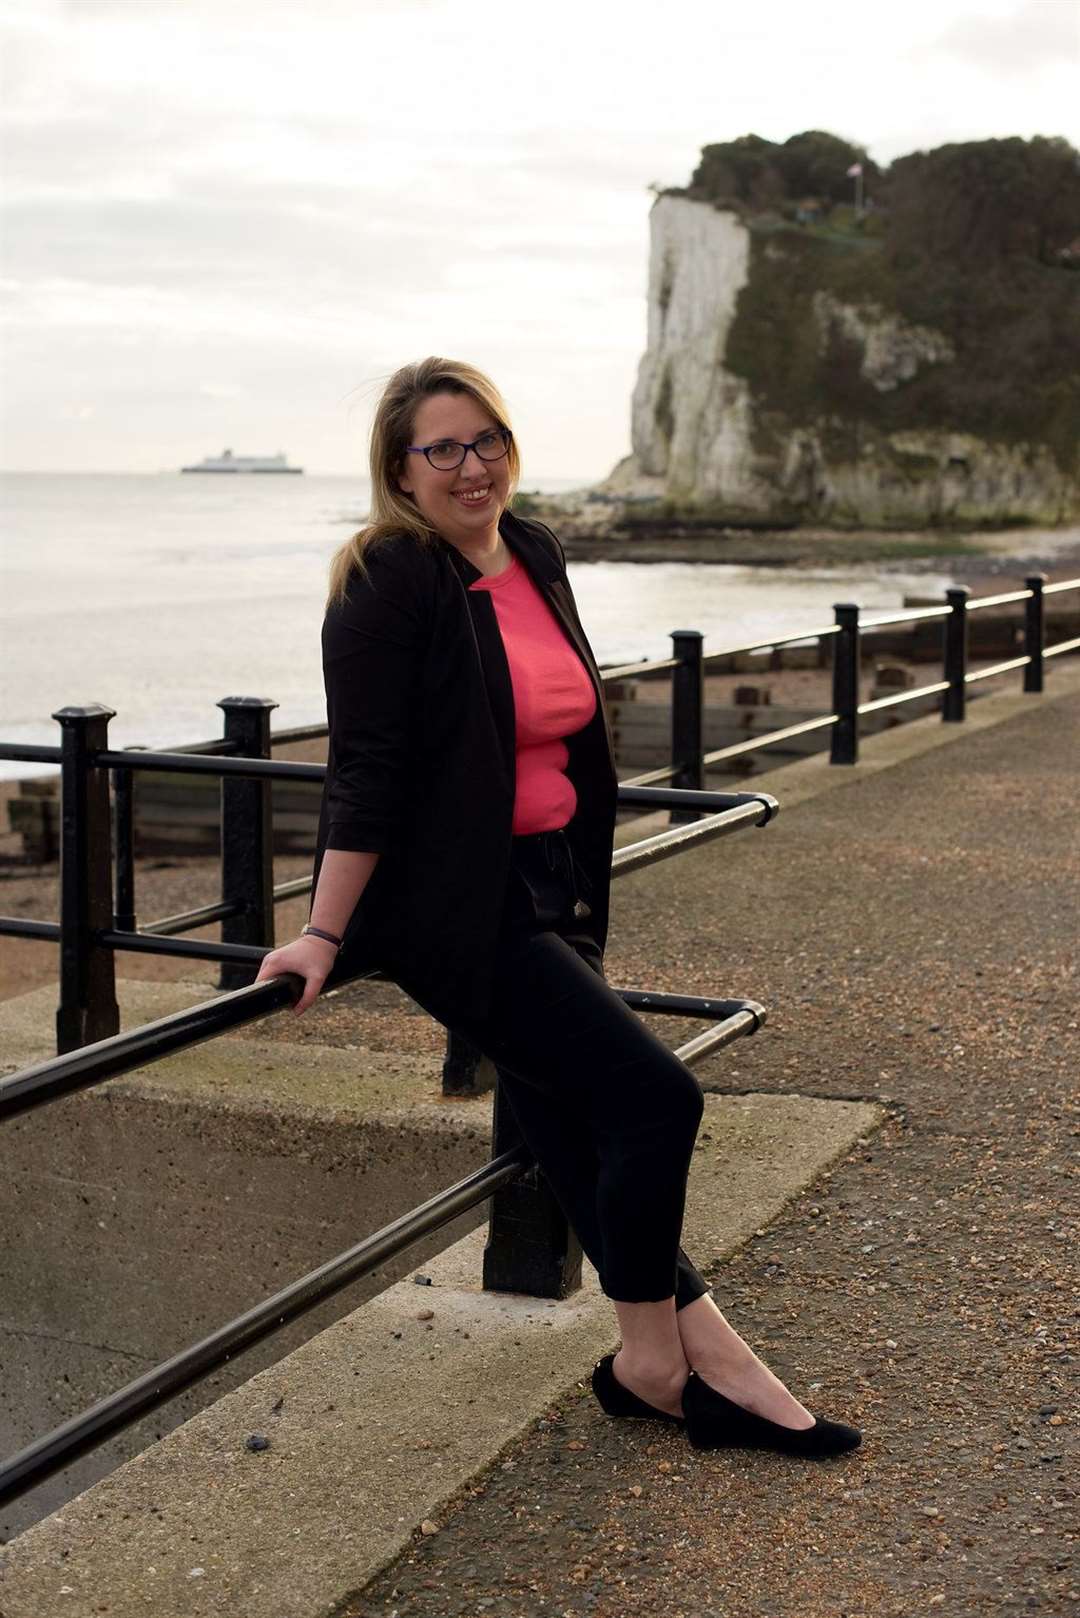 Labour's parliamentary candidate, Charlotte Cornell has called for P&O Ferries to be nationalised to stop it paying out millions to shareholders after receiving millions in government aid